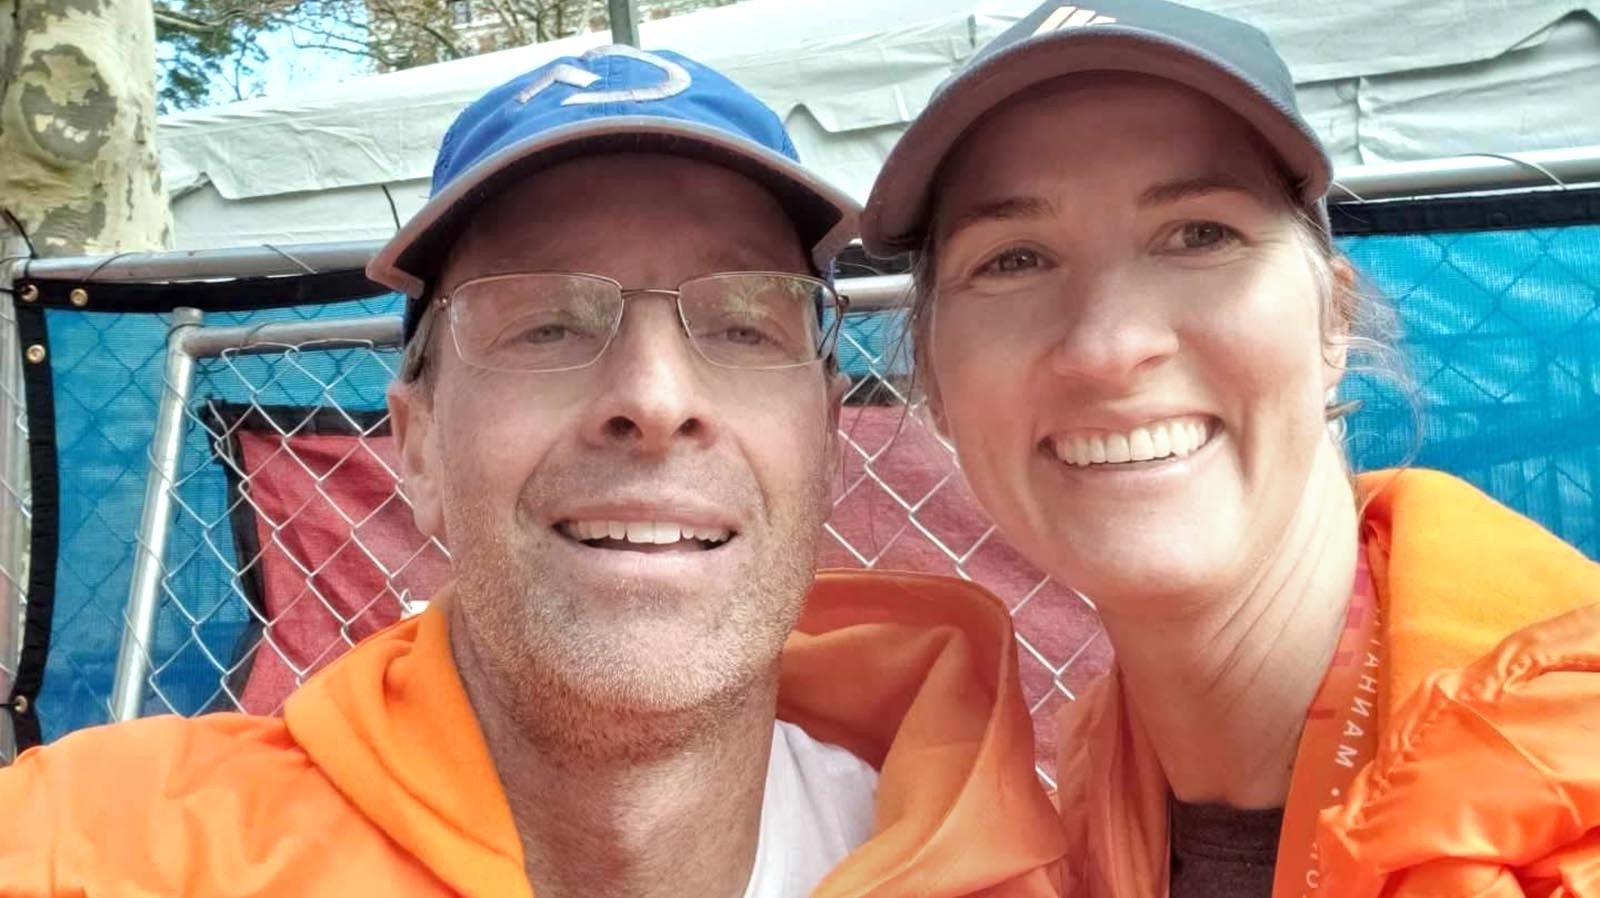 Joe and AnnMarie Wilson have run 45 marathons while raising their four children, because Joe worked up the nerve to ask AnnMarie if she was into running back in 2002.